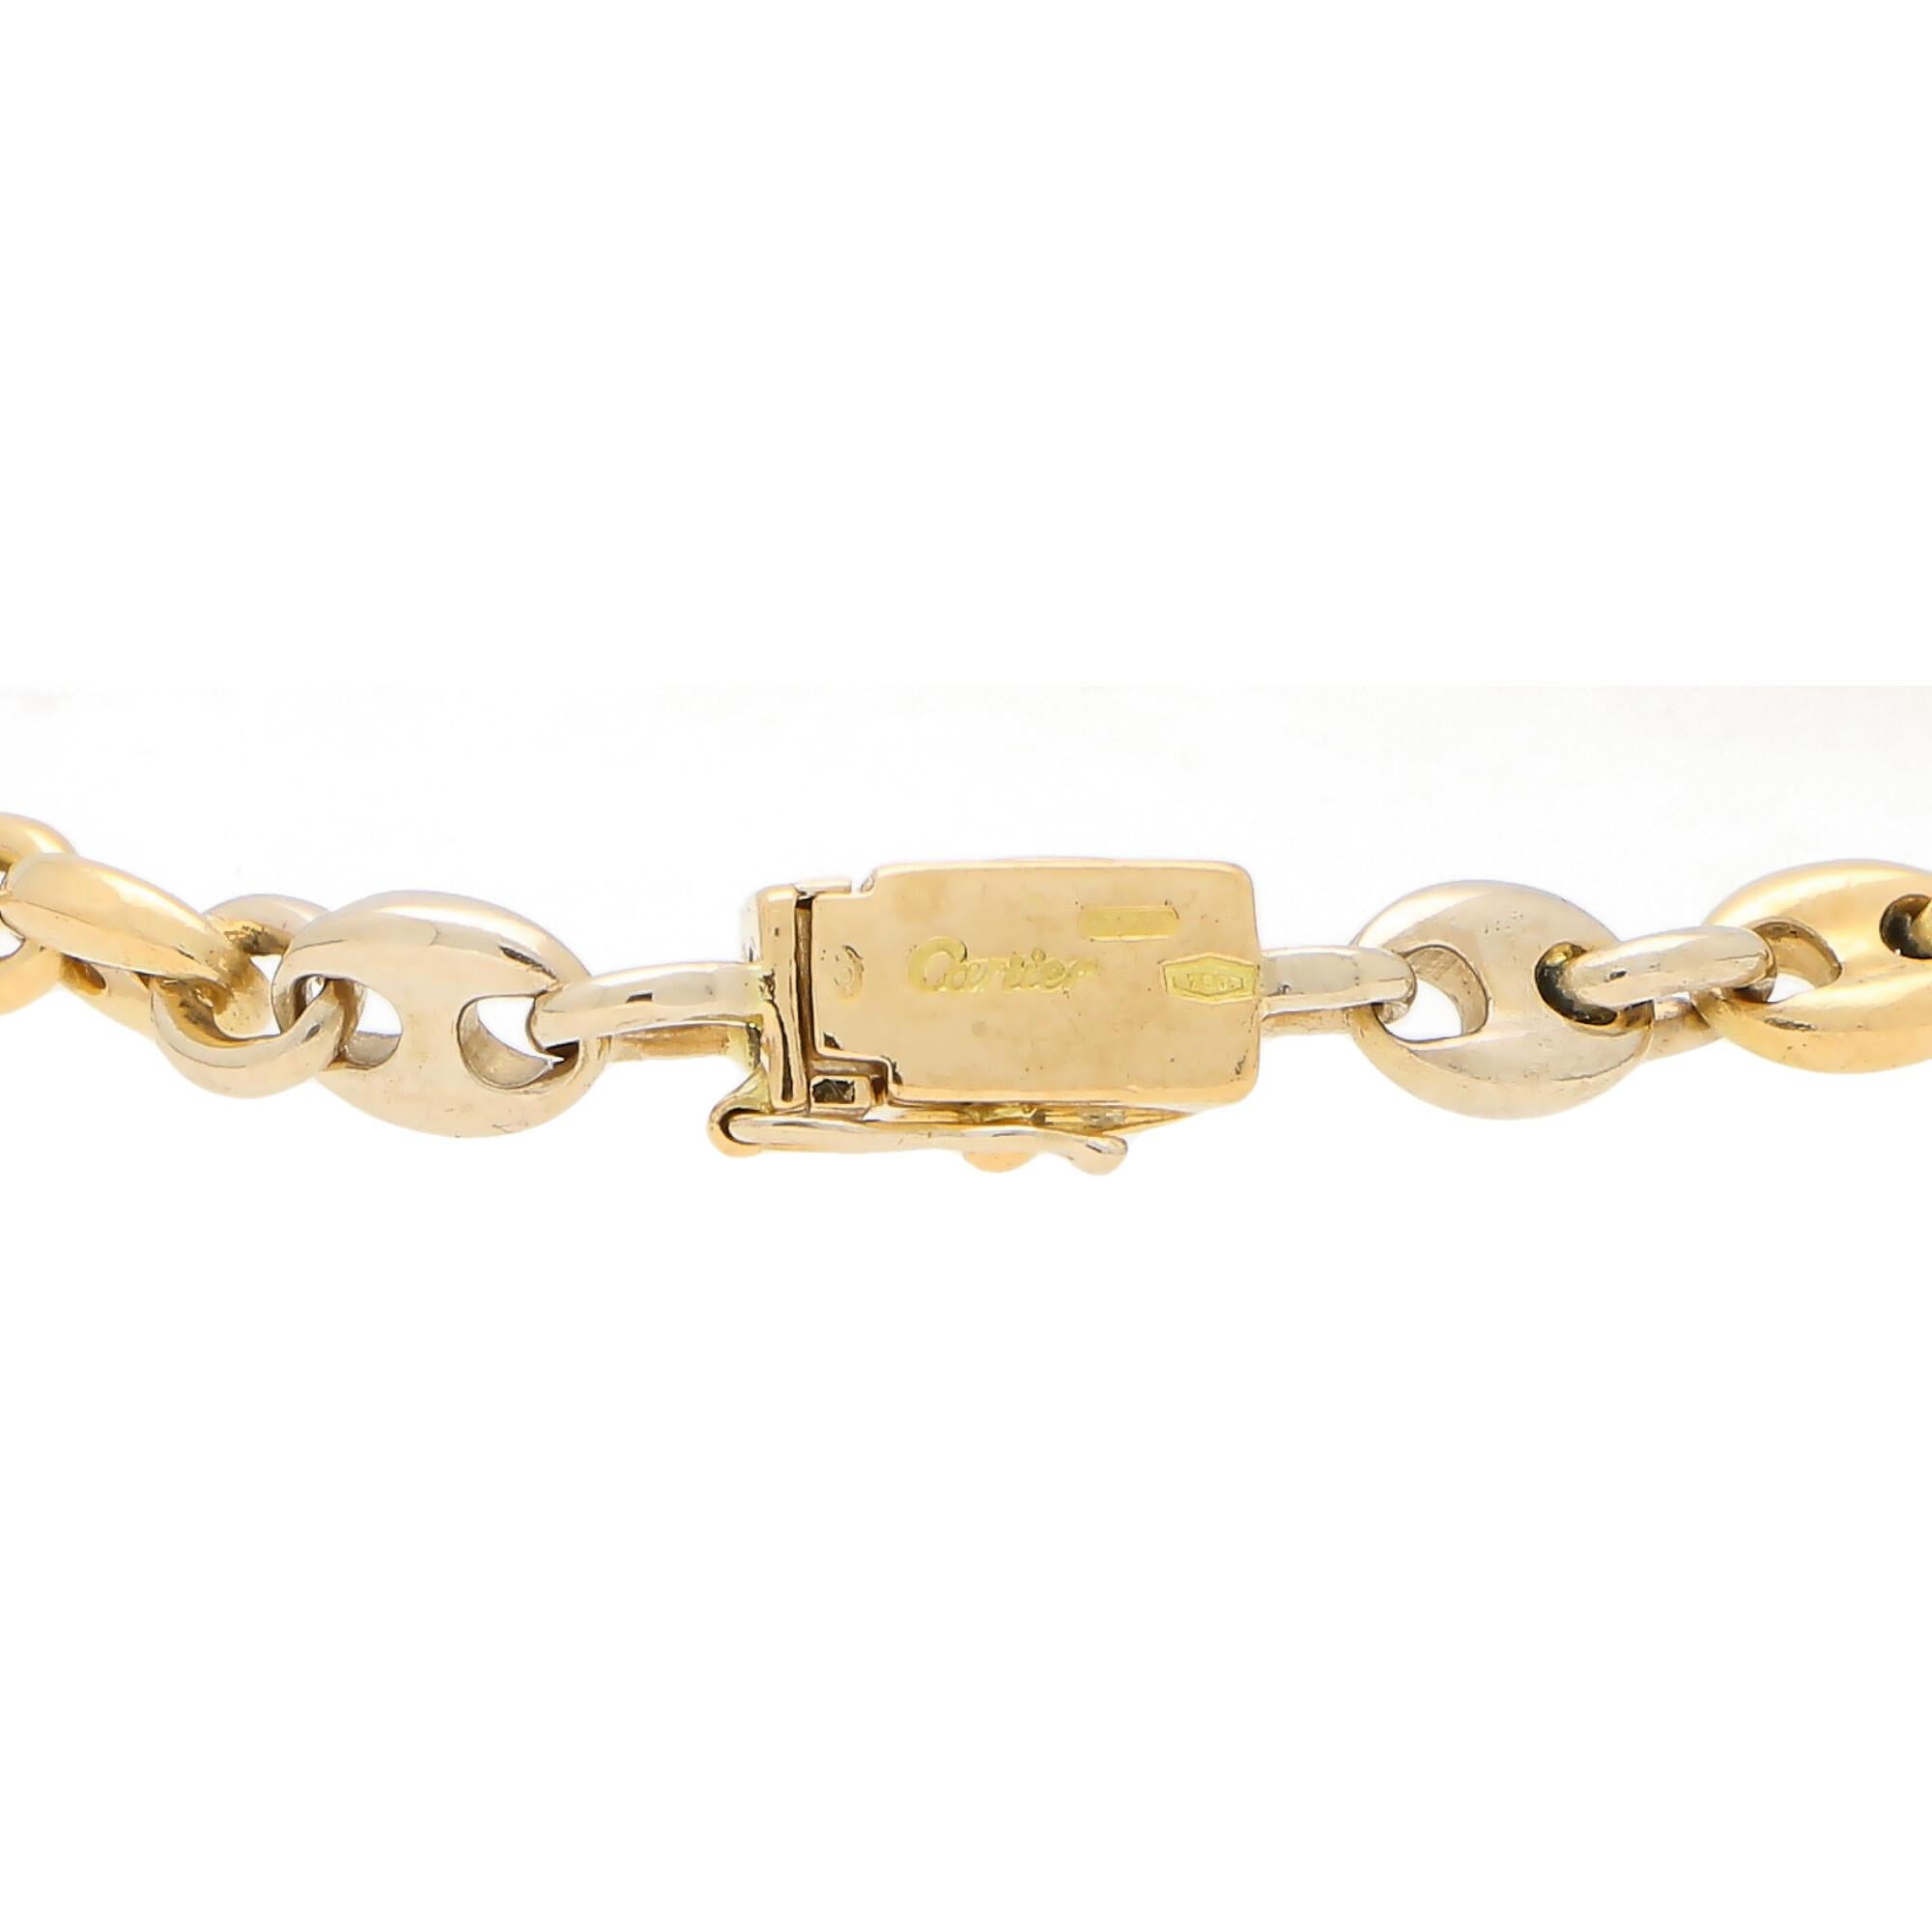  A simple yet incredibly beautiful Cartier anchor link bracelet made of solid 18k yellow and white gold.

The bracelet is composed of 25 anchor links which alternate between white and yellow gold colors. Due to the design of the bracelet it could